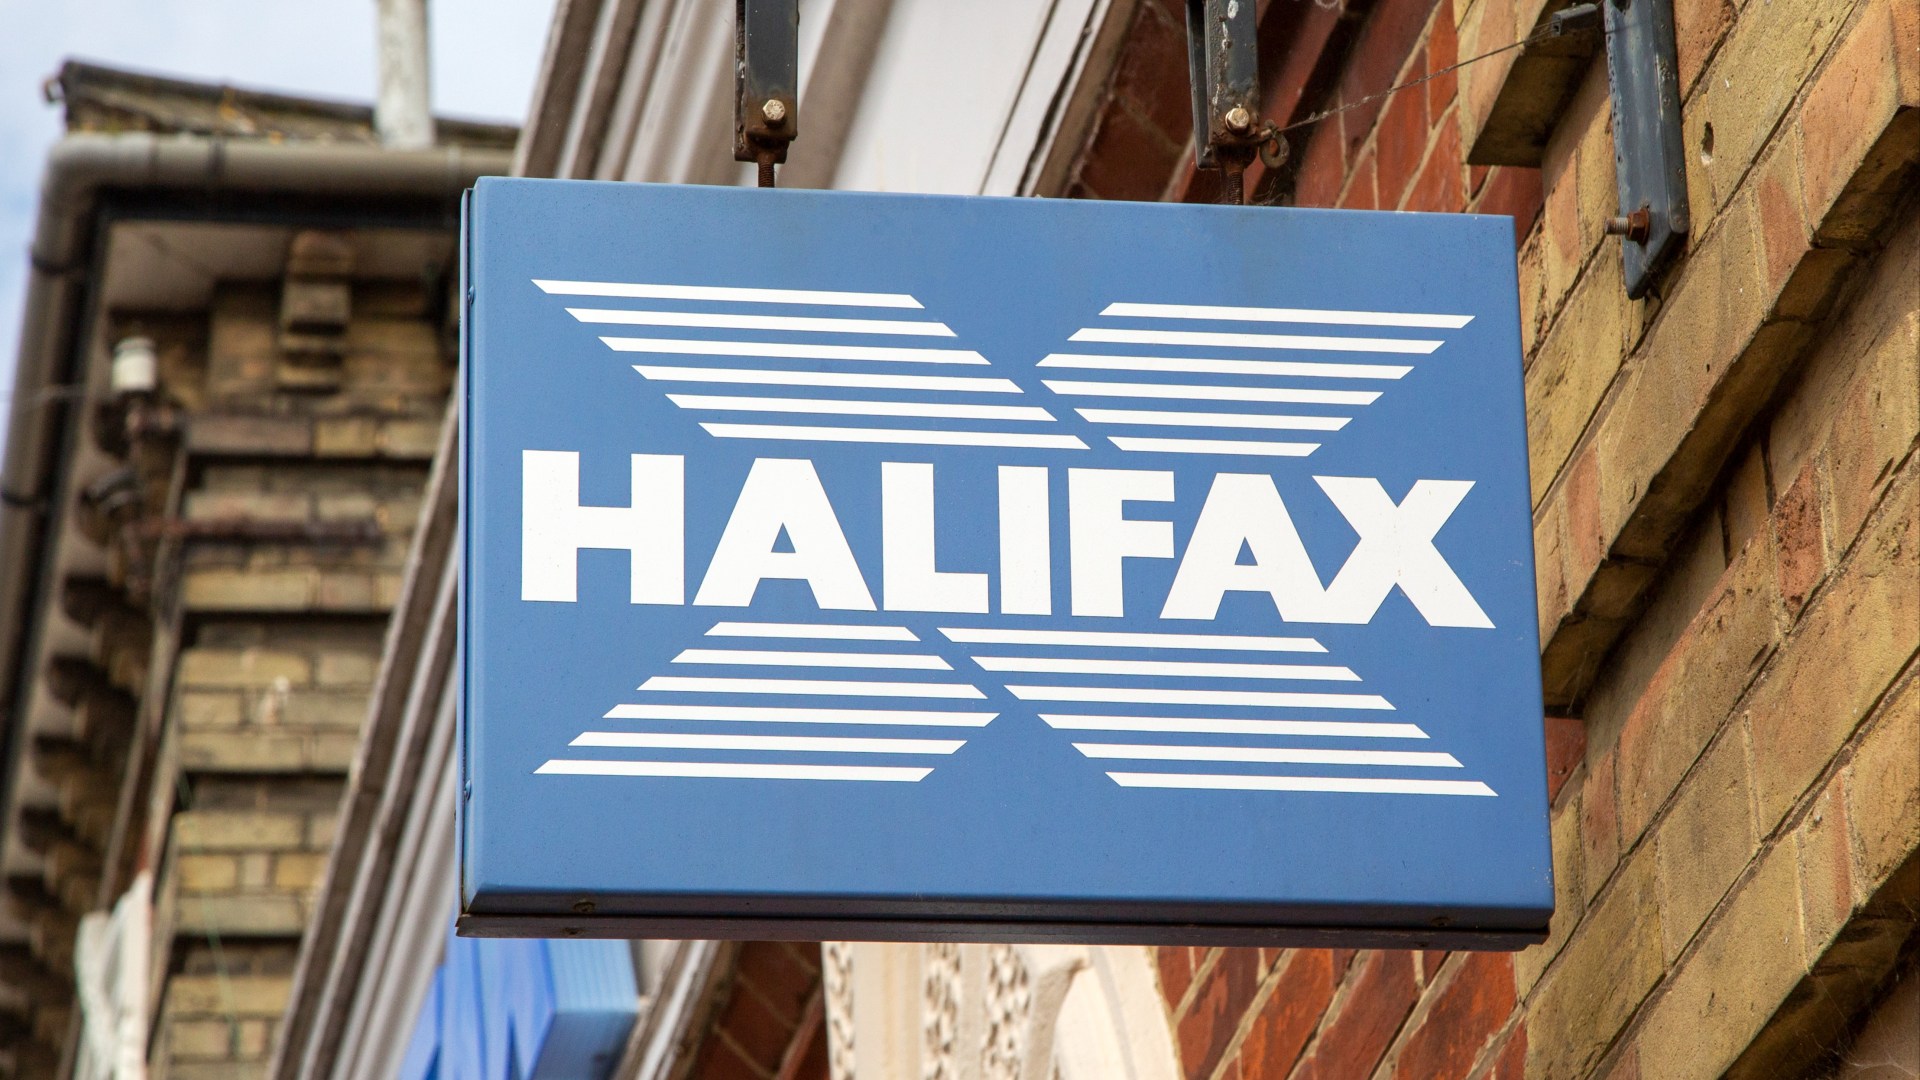 Full list of Halifax bank branches closing this year – as 22 more sites added to the list [Video]